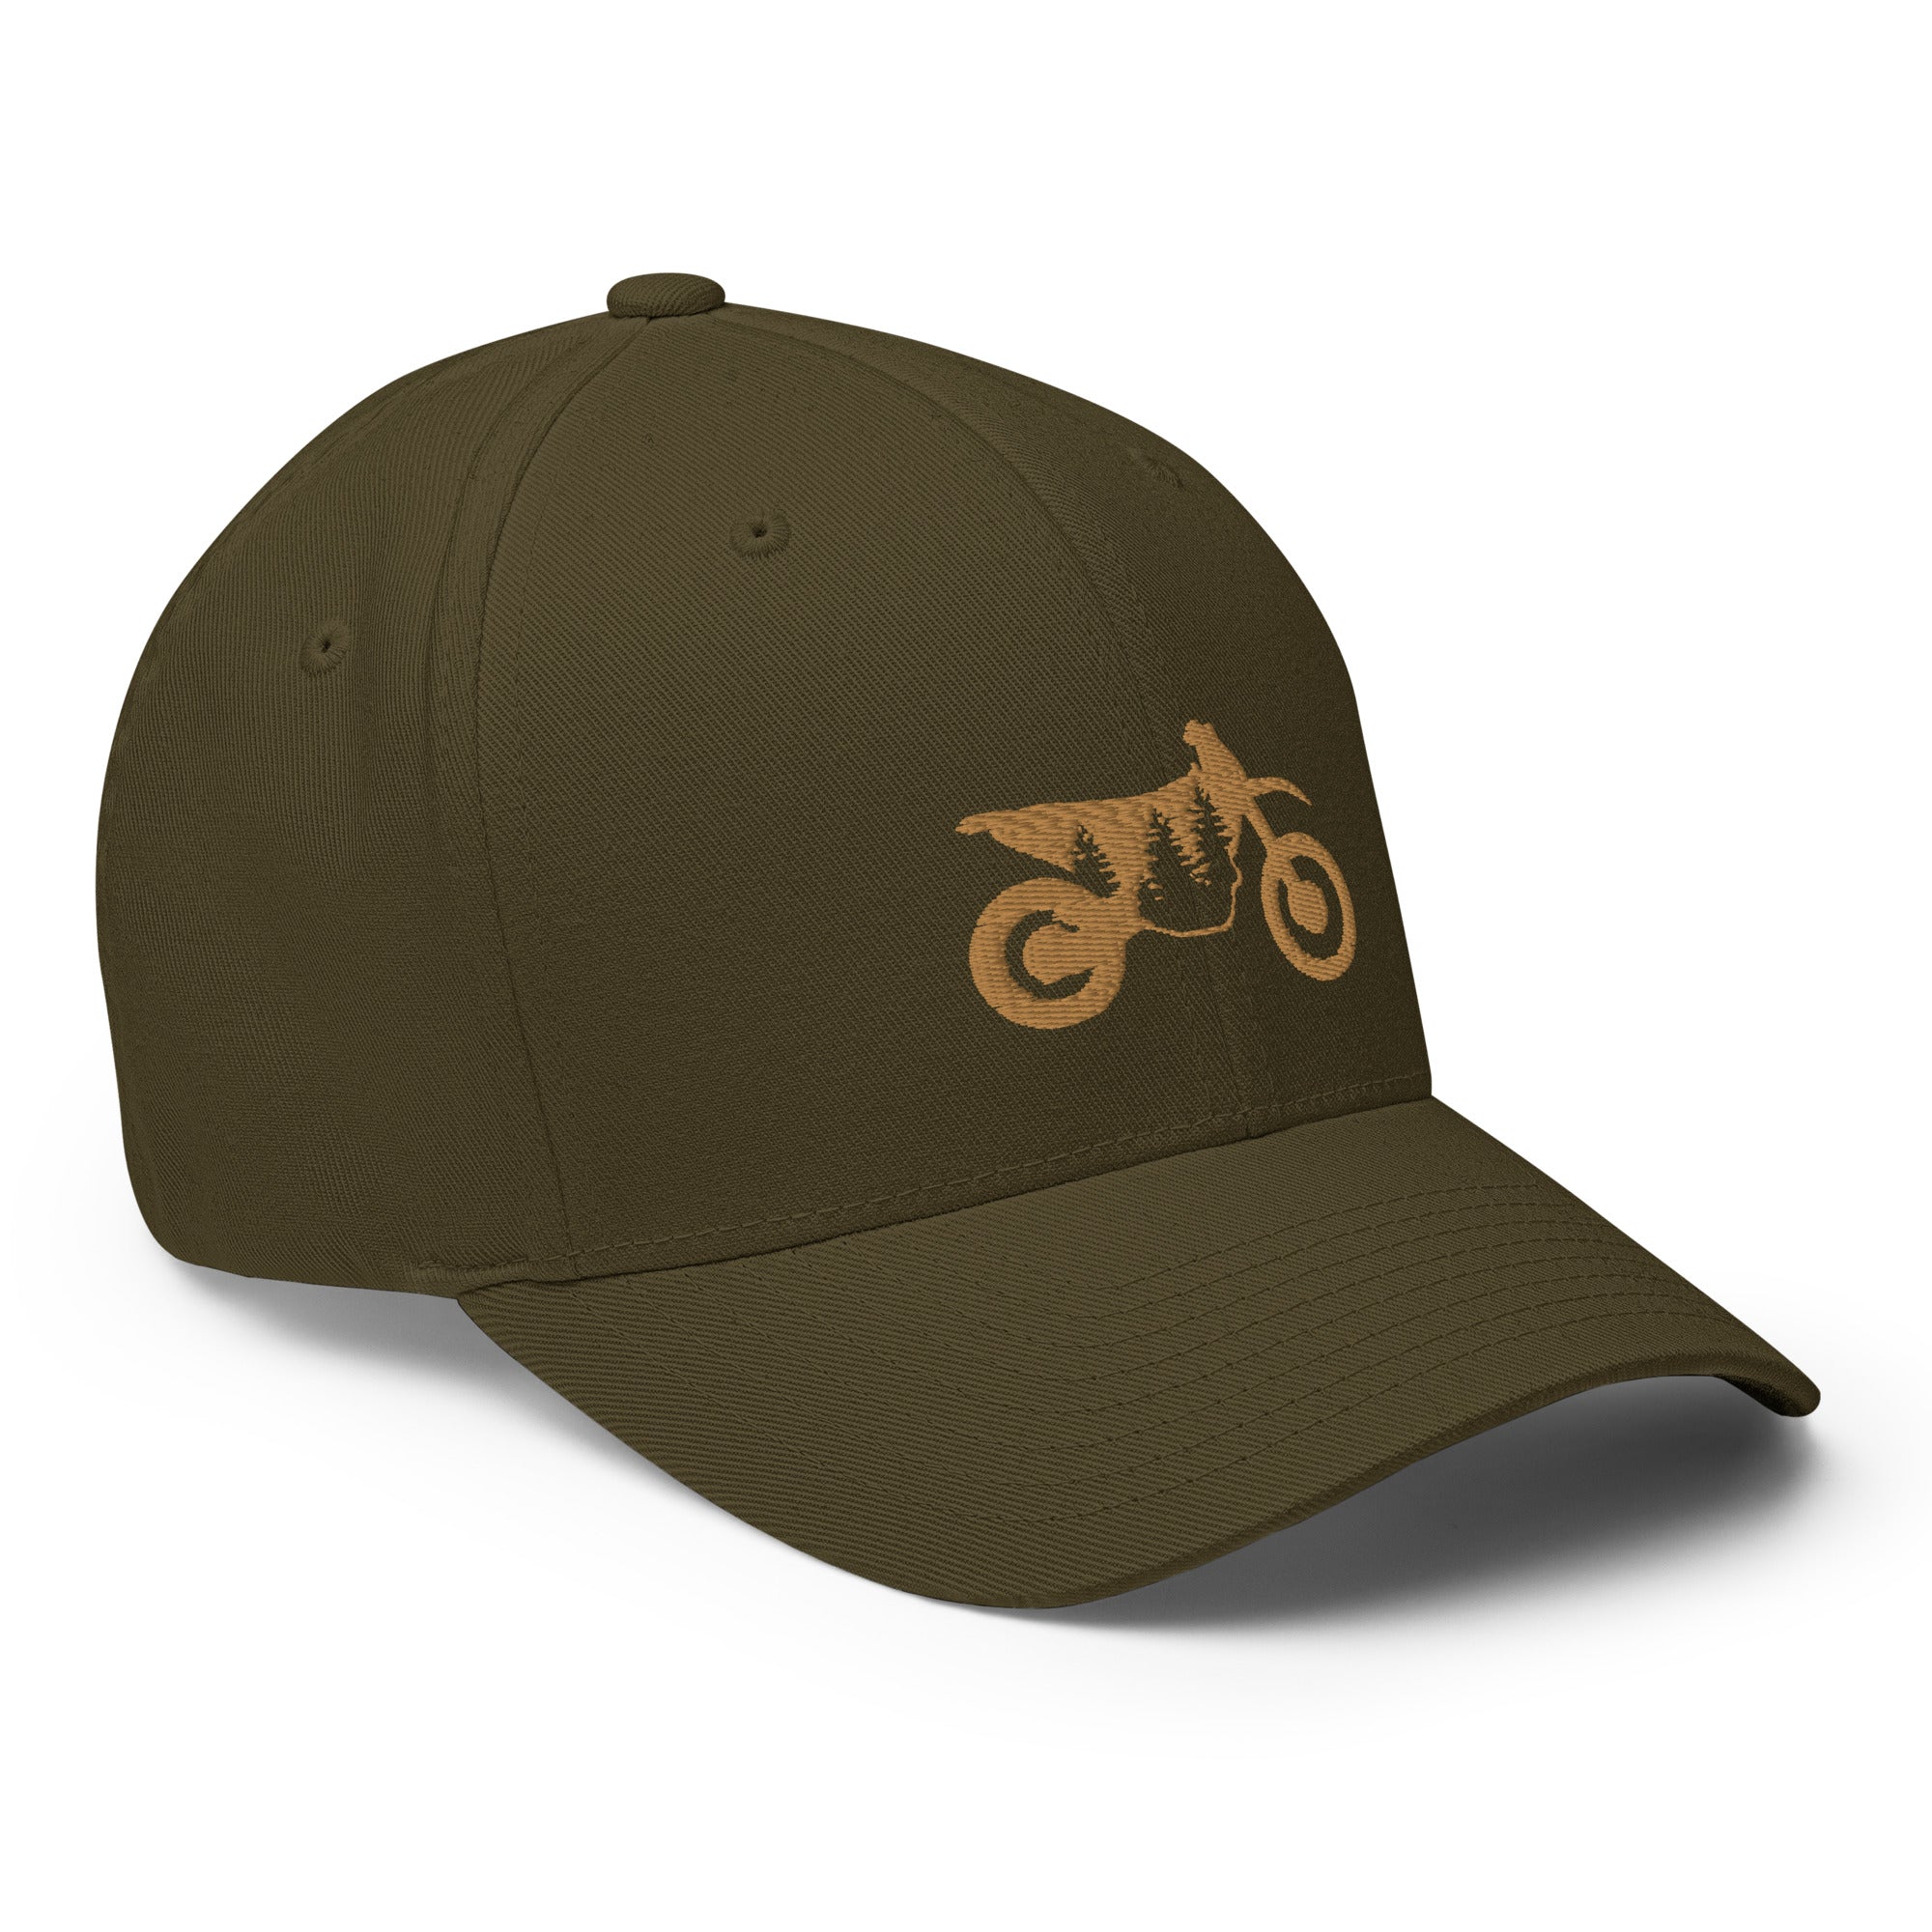 TreeBike Hat, Fitted, PNWDS